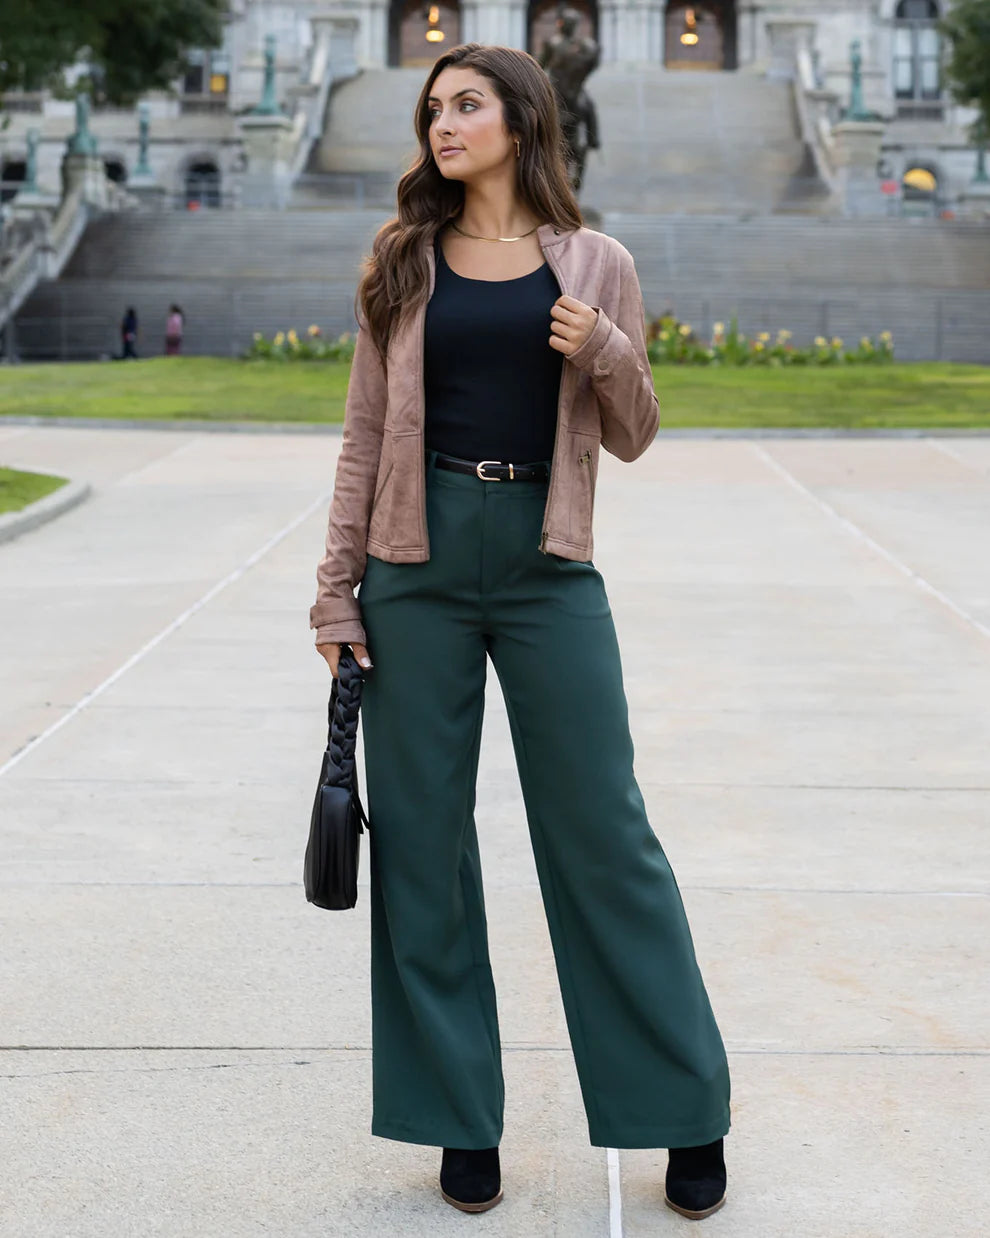 Pocketed Black Wide Leg Pants - Grace and Lace